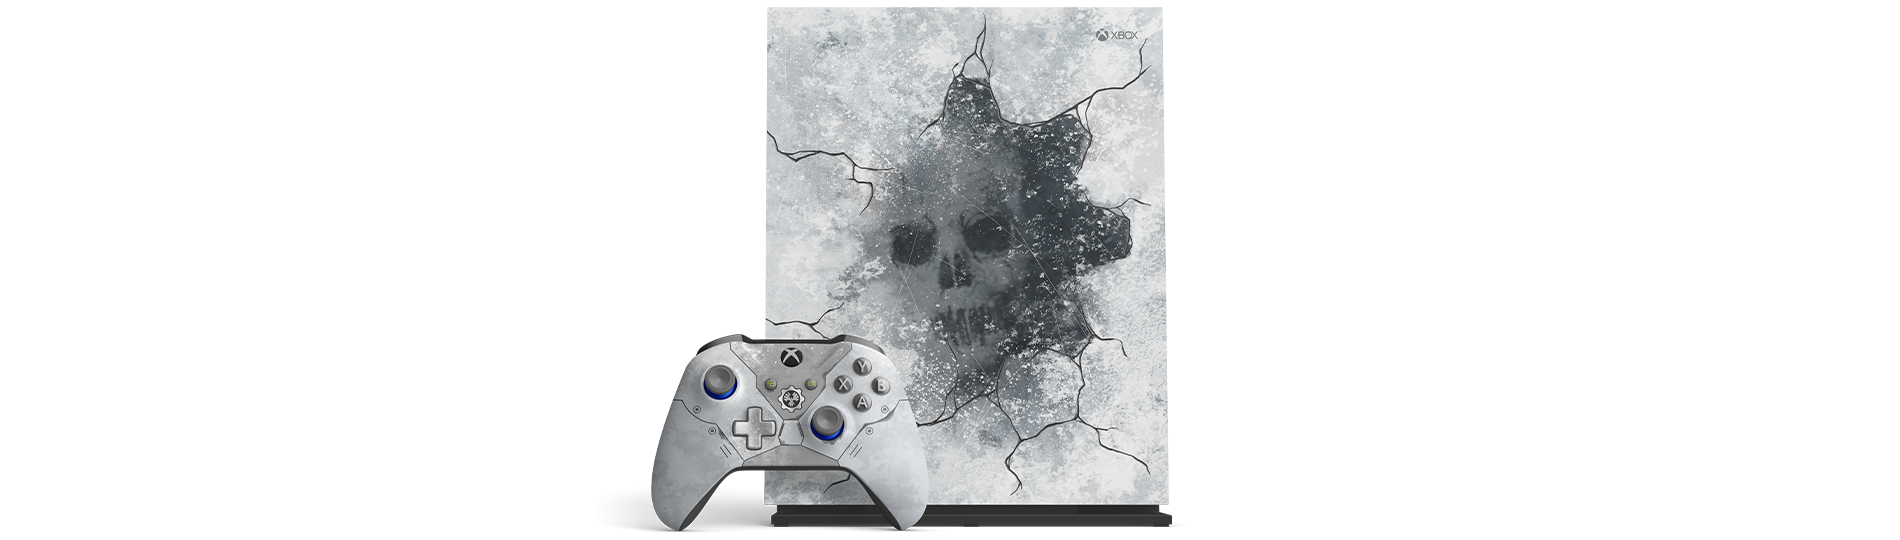 xbox one x gears 5 ultimate edition